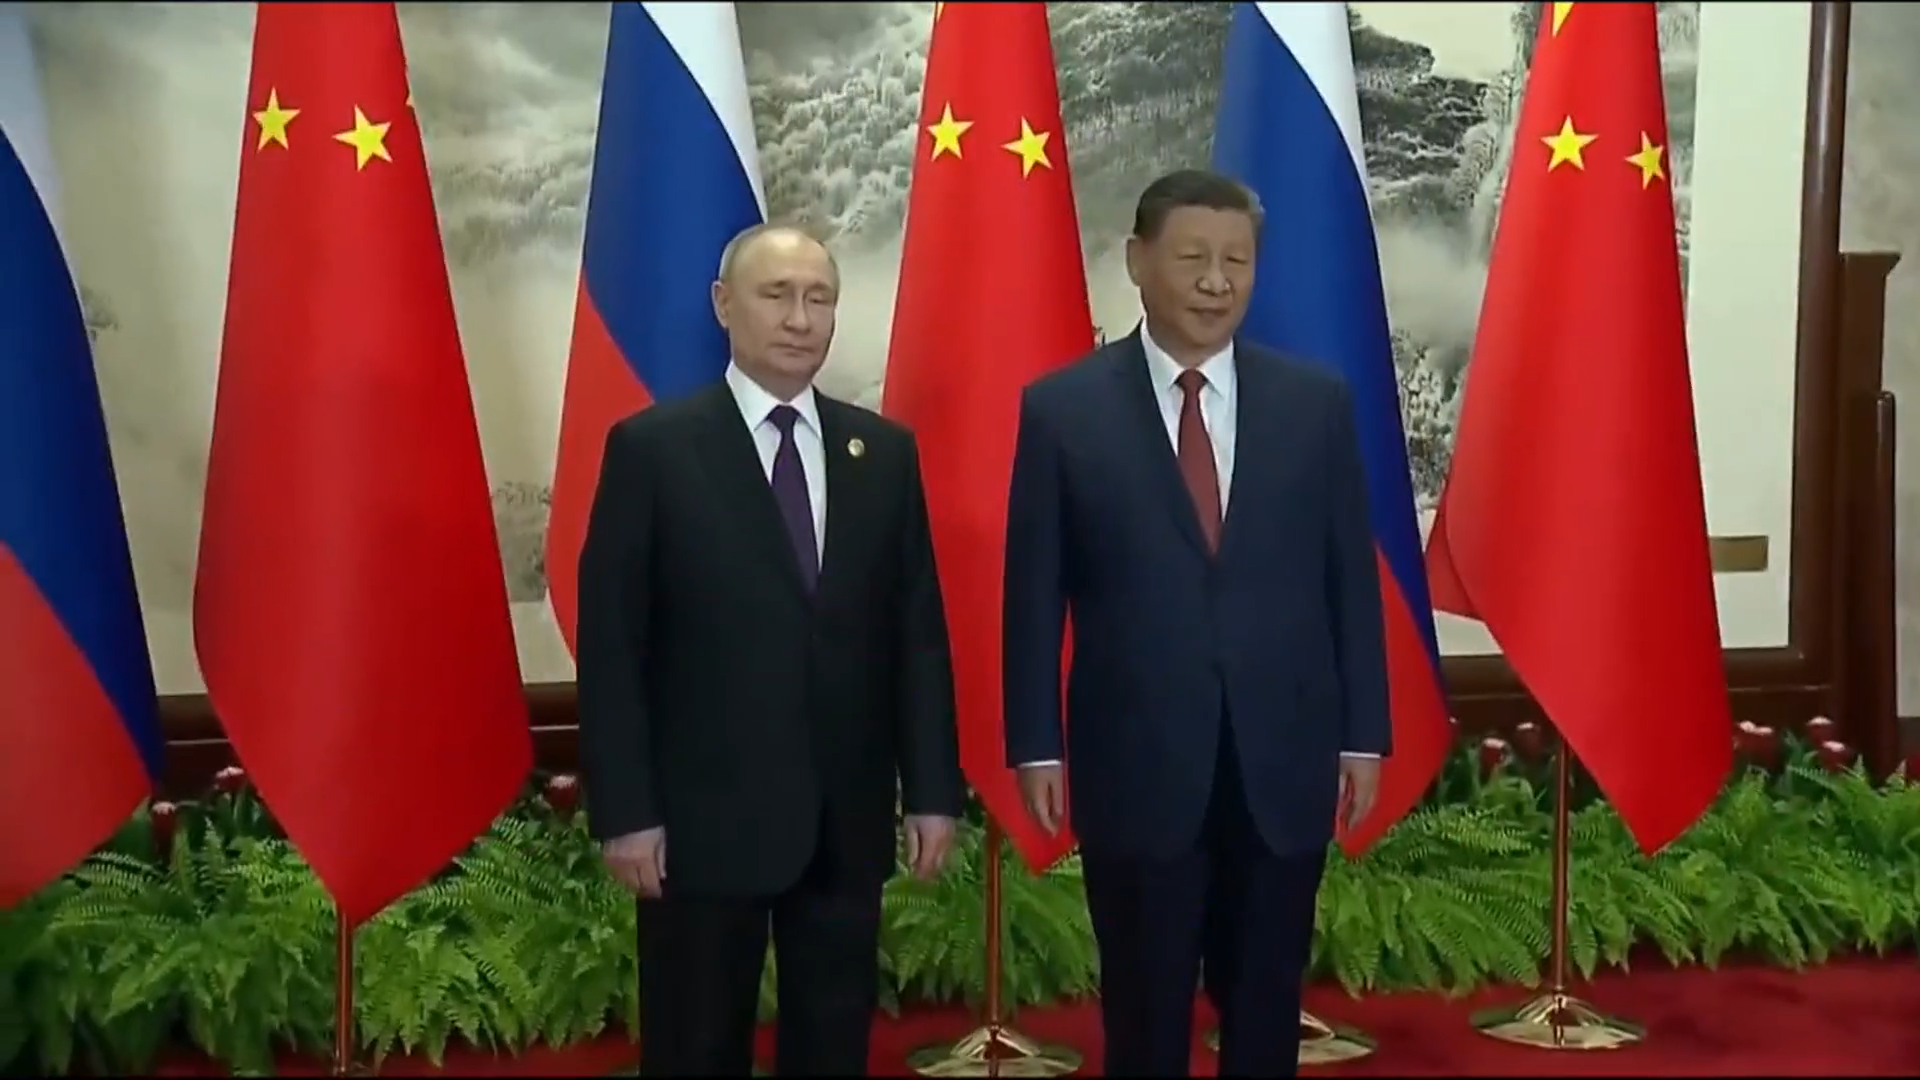 Putin meets Xi in Beijing amid widening gulf with West  Channel 4 News [Video]